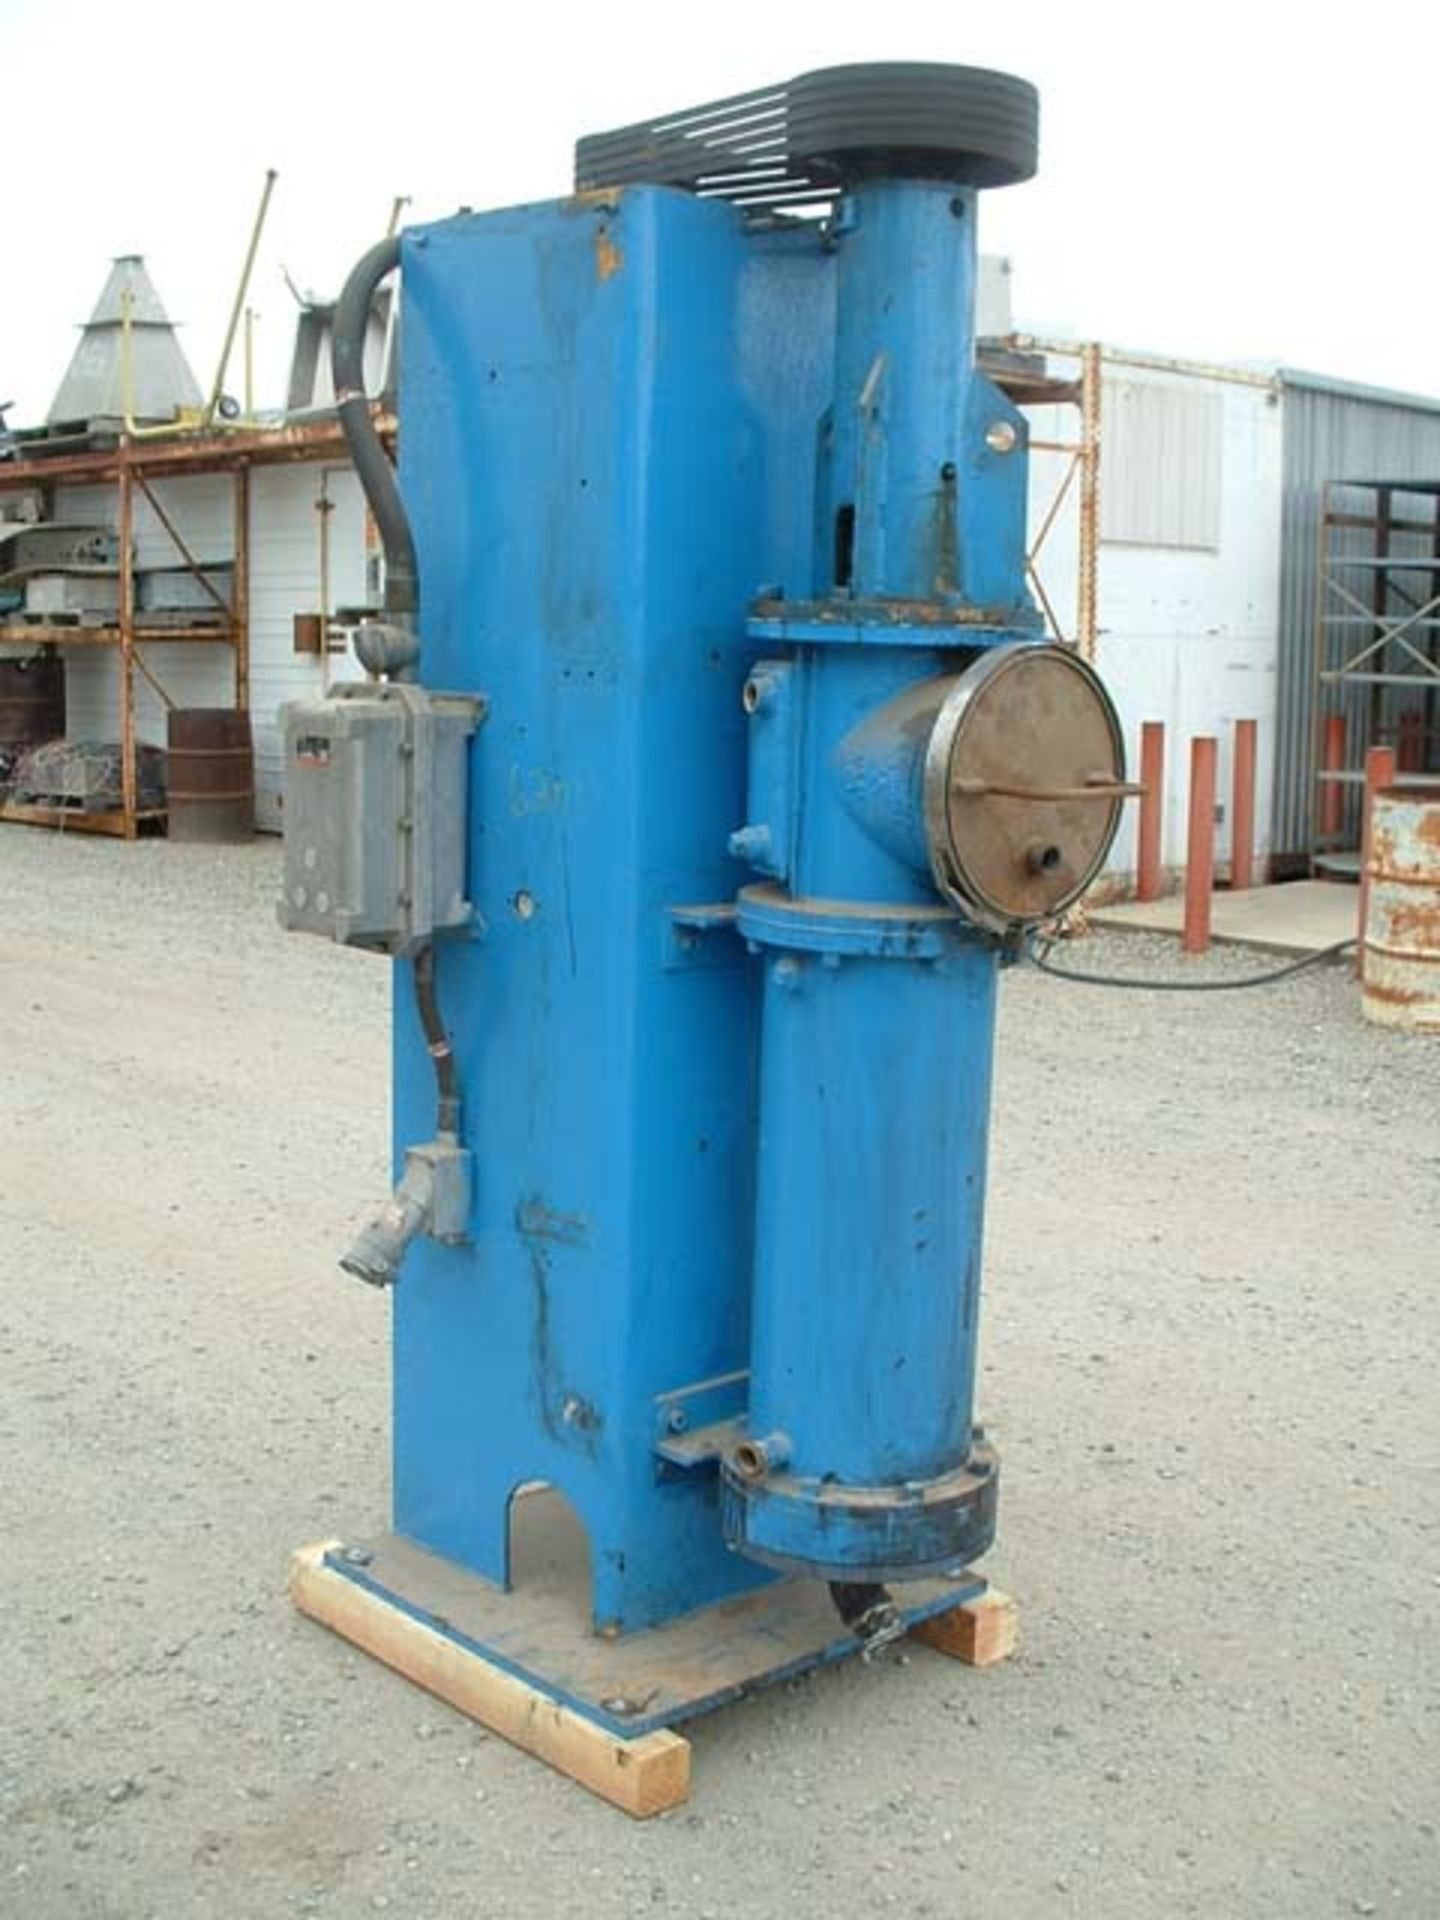 (Located in Morgan Hill, CA) Morehouse Media Hill 30 HP 1750 RPM 220/440 3 Phase Motor with UL Tag - Image 3 of 3